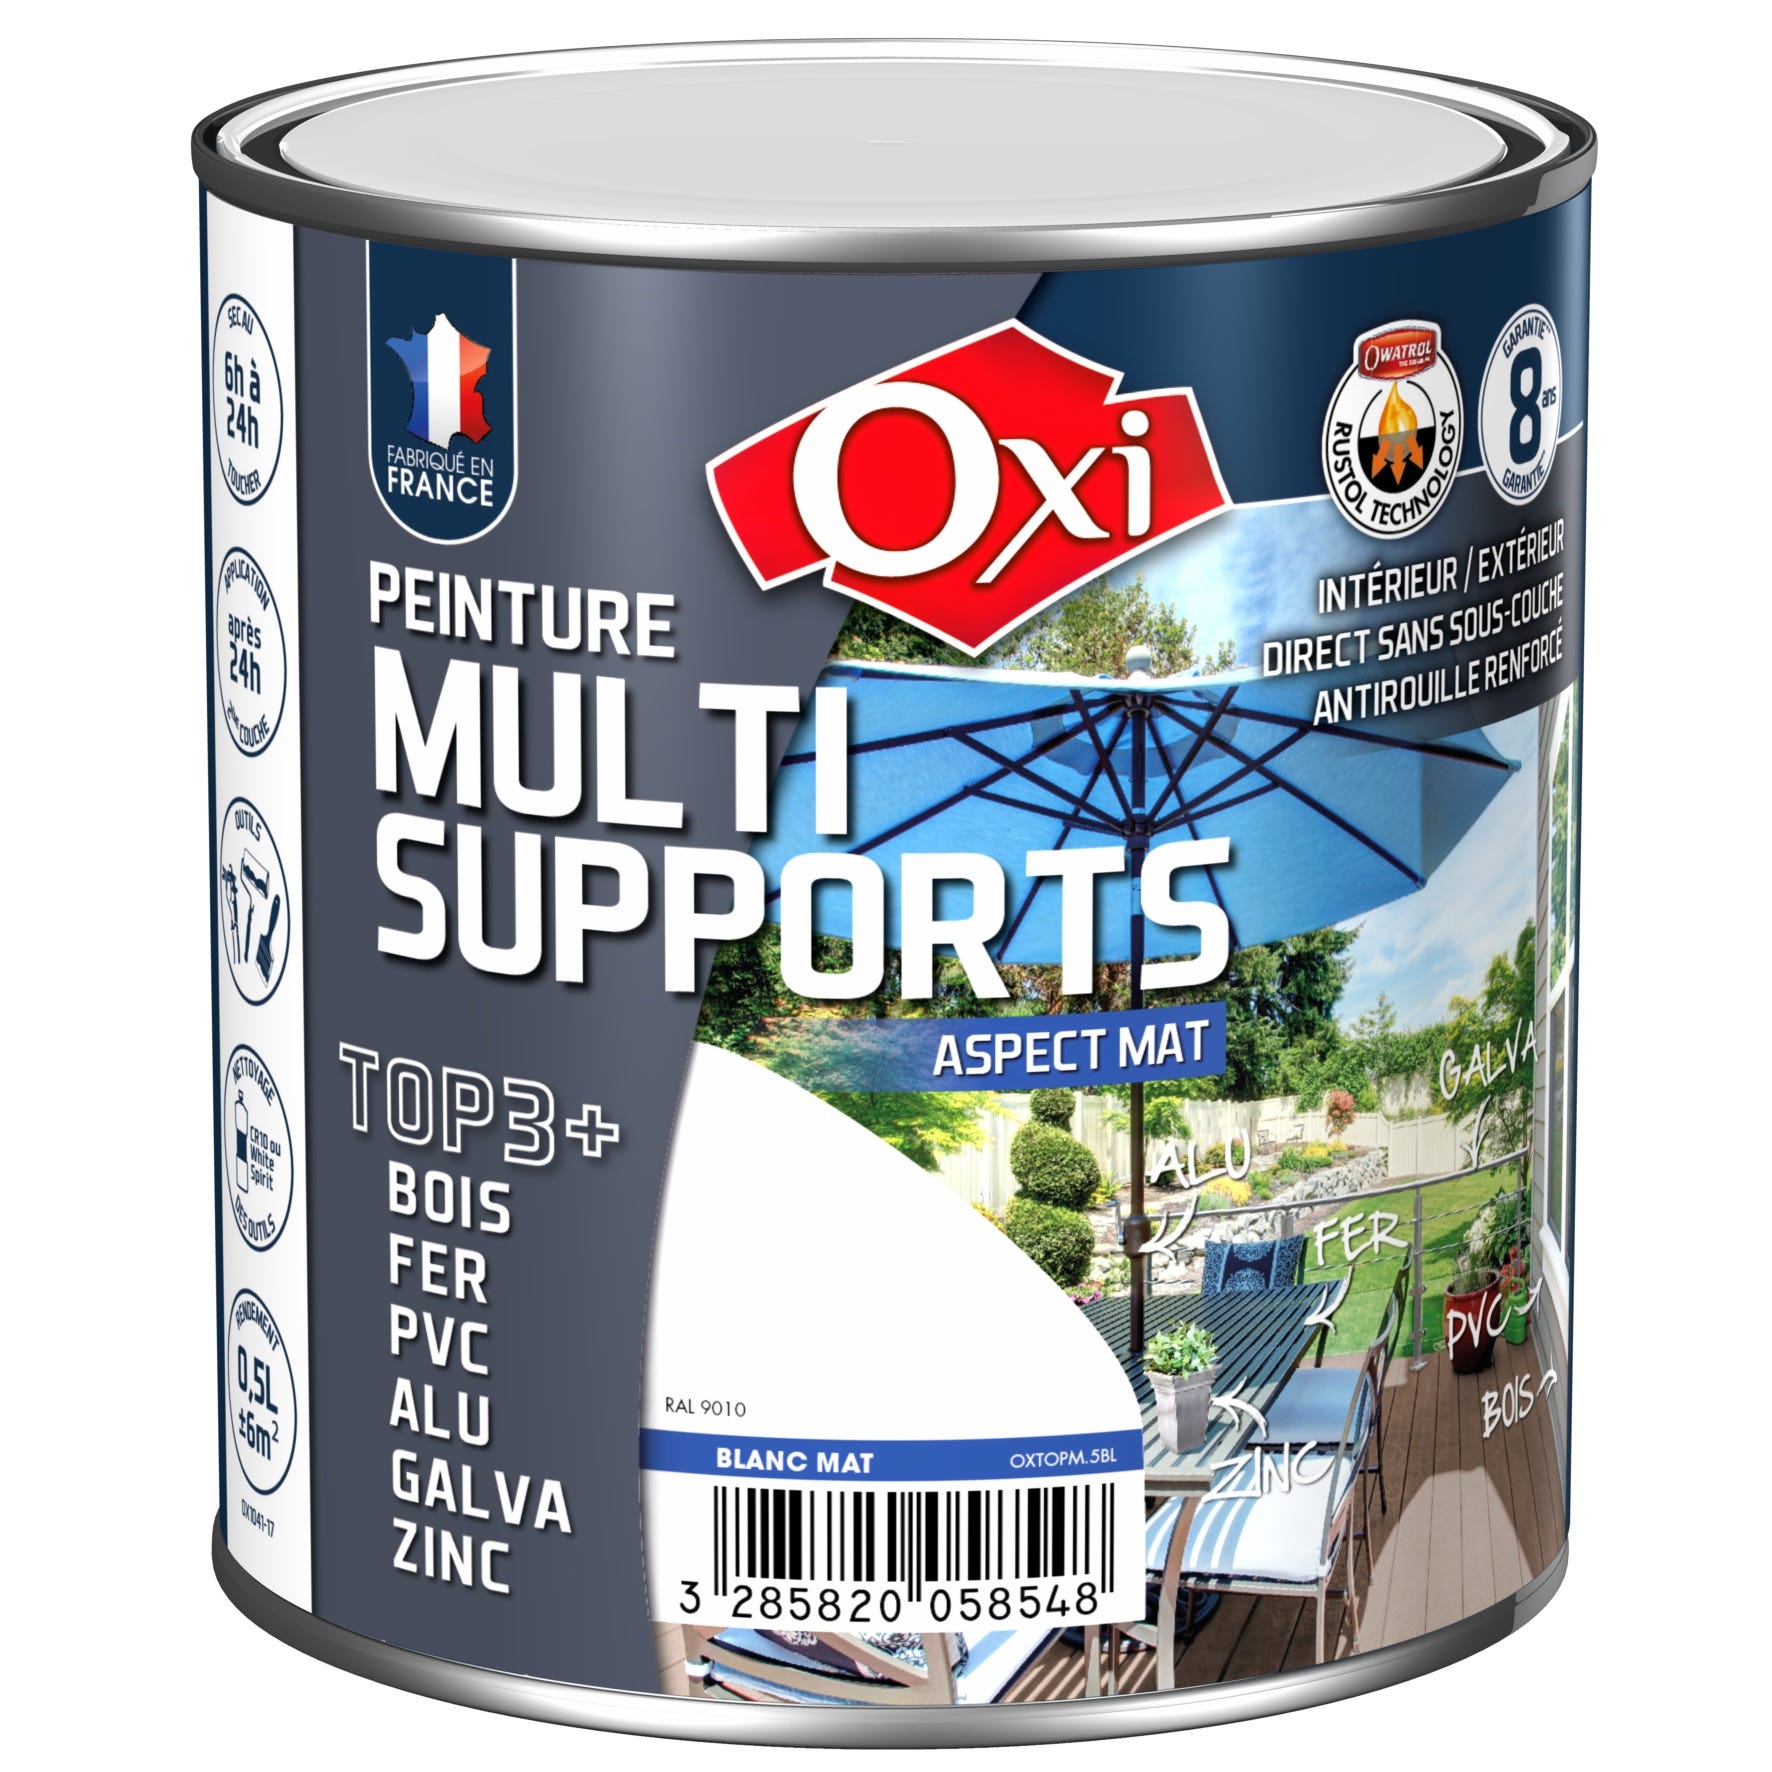 Top 3 Multi Supports Owatrol PEINTURE MULTI SUPPORTS MAT Gris Beige (RAL 7006) 2.5 litres 0